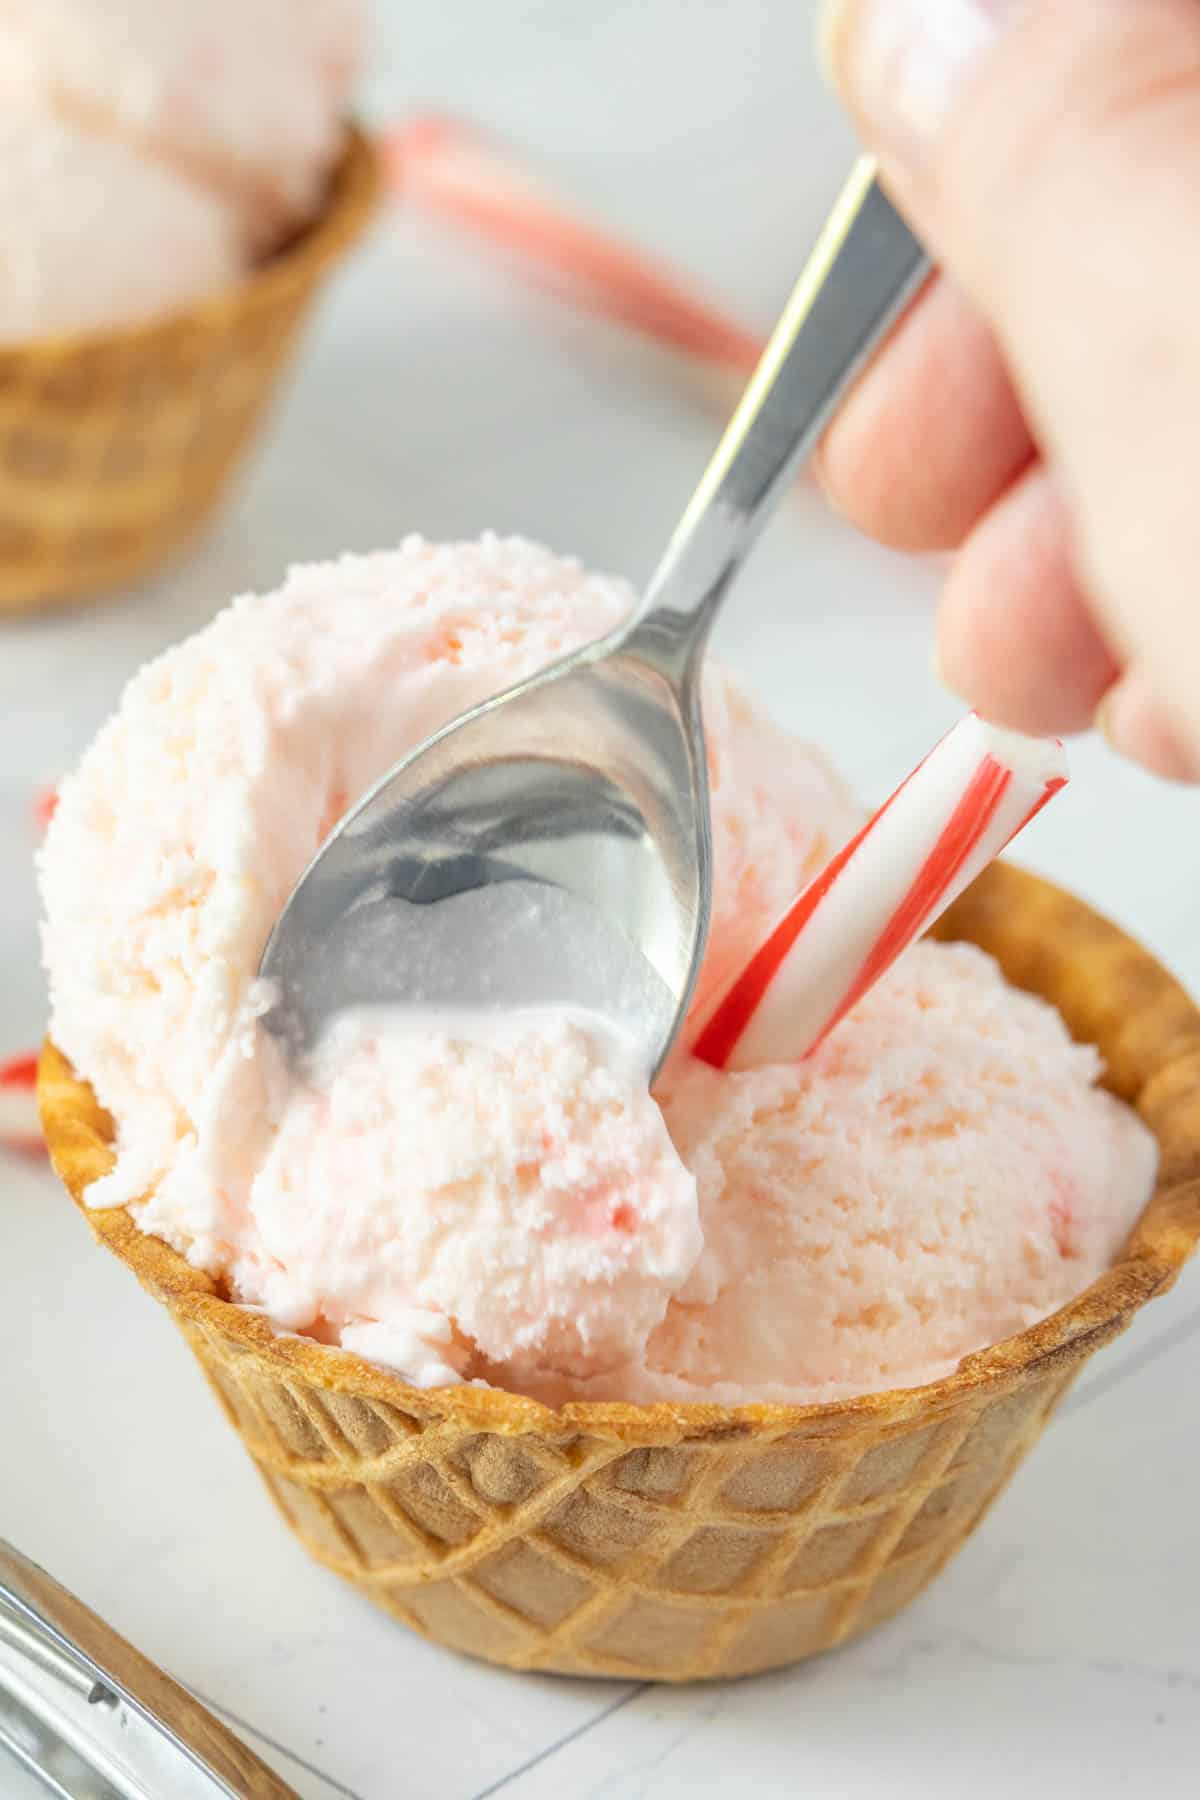 Candy cane ice cream in a bowl with a spoon.